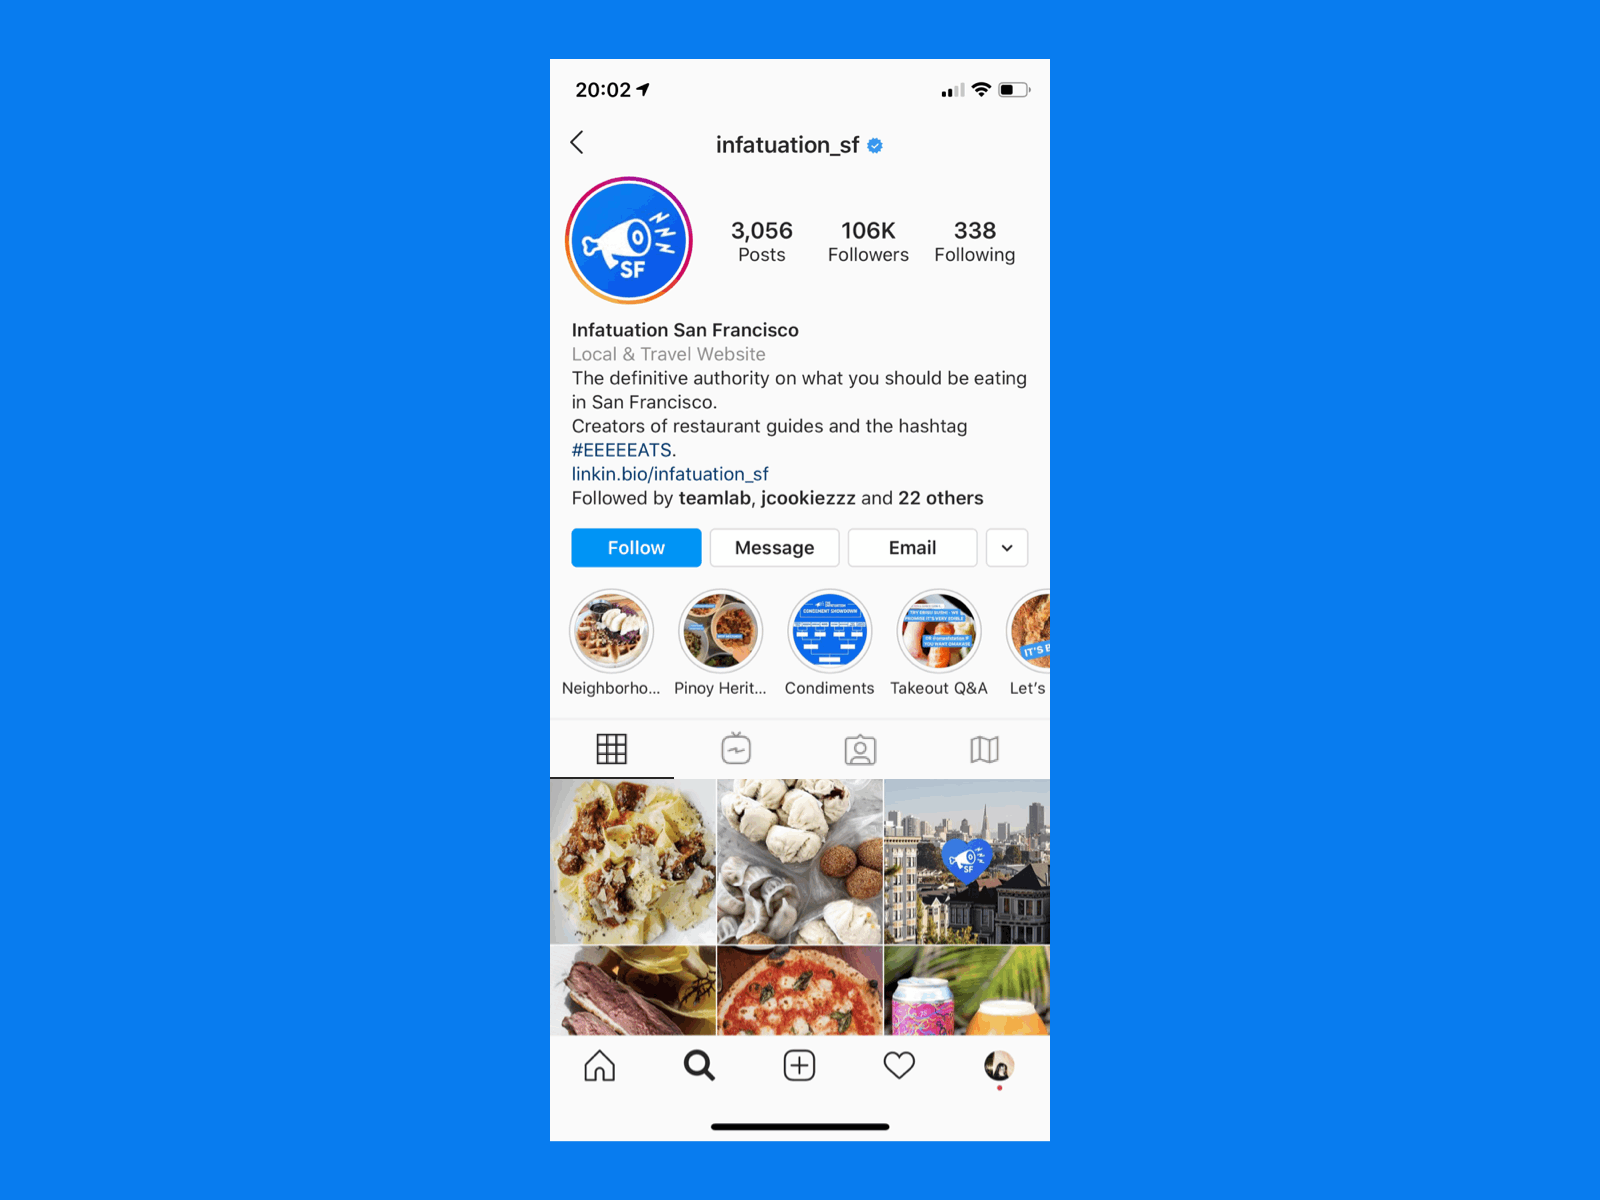 Discover new places on Instagram design instagram interaction design places in context restaurant discovery the infatuation ux design